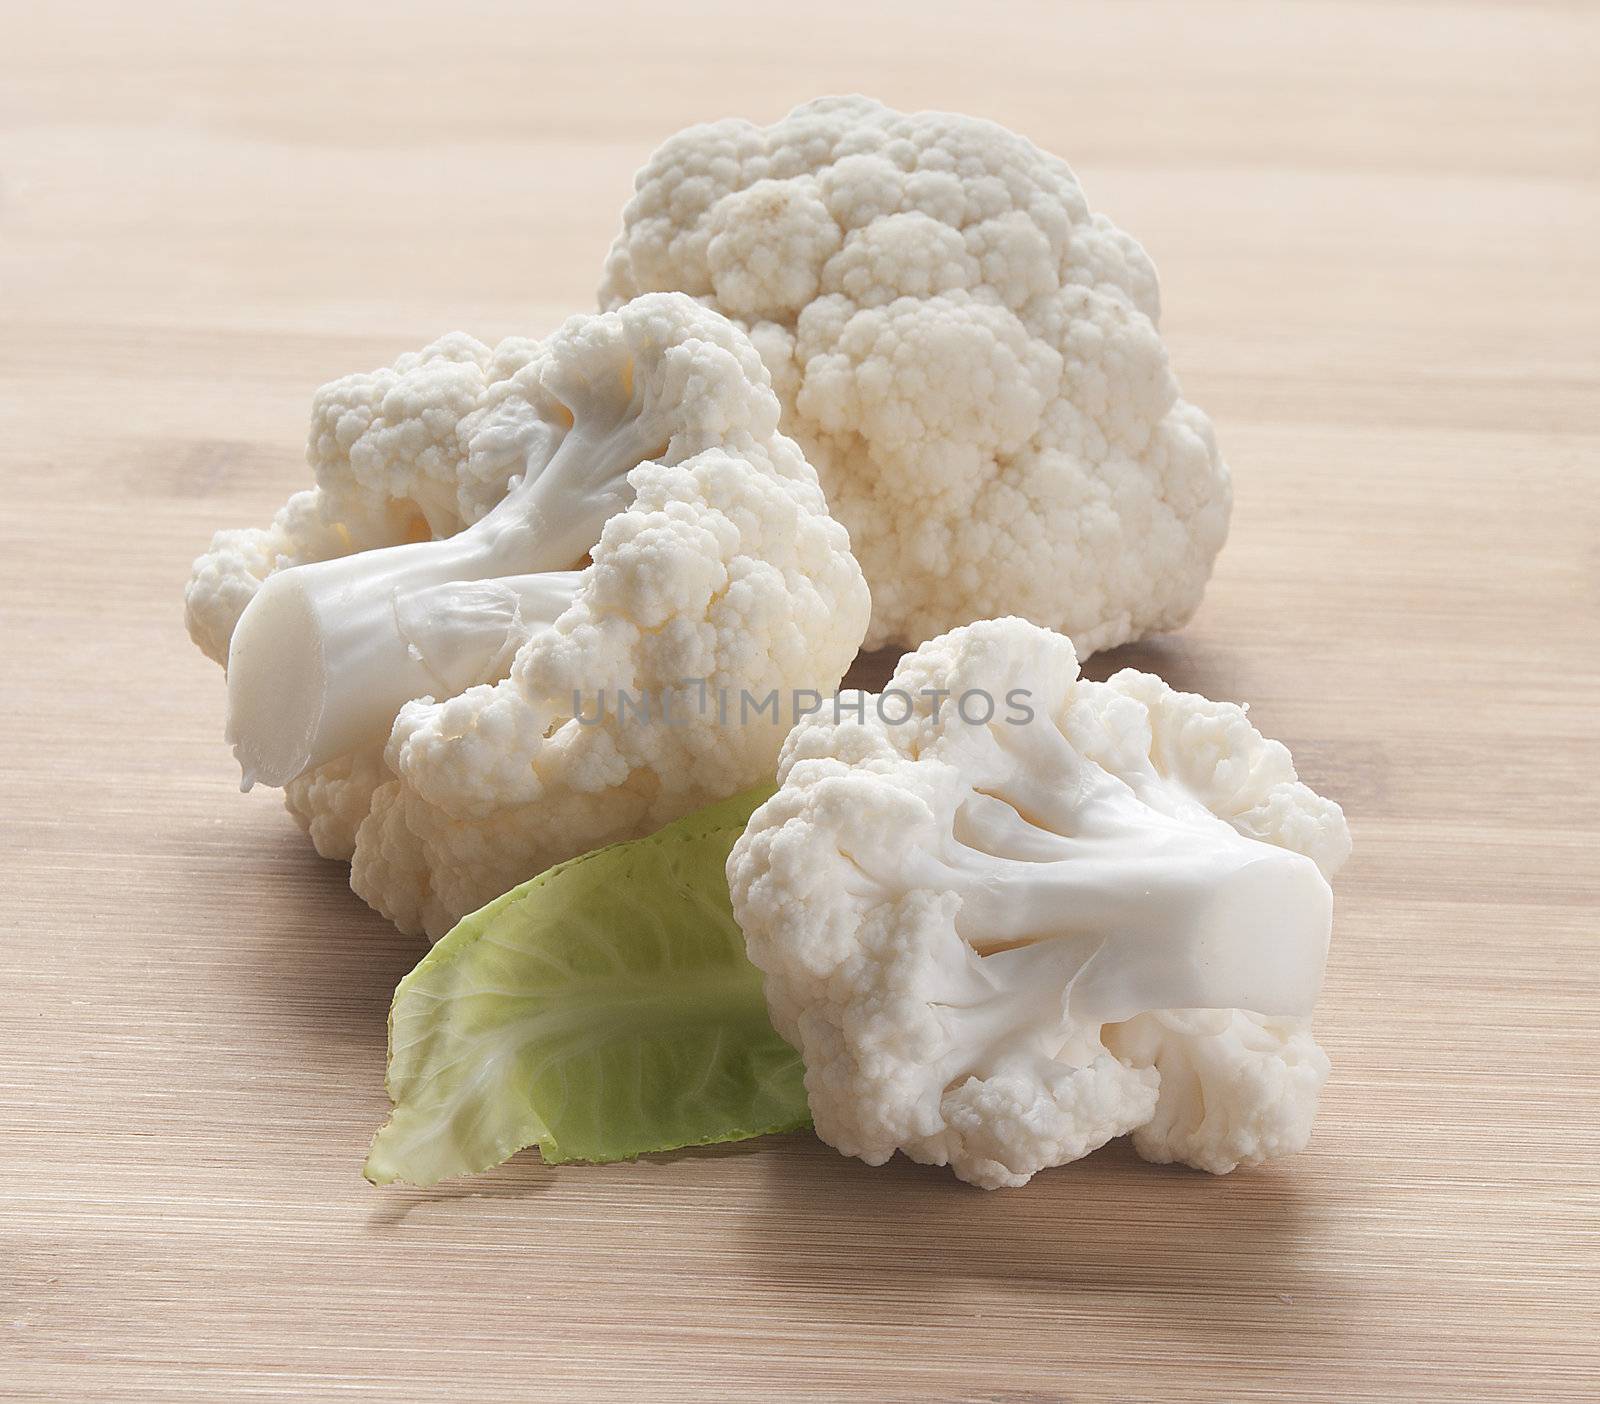 Some branches of cauliflower with leaf on the wooden board